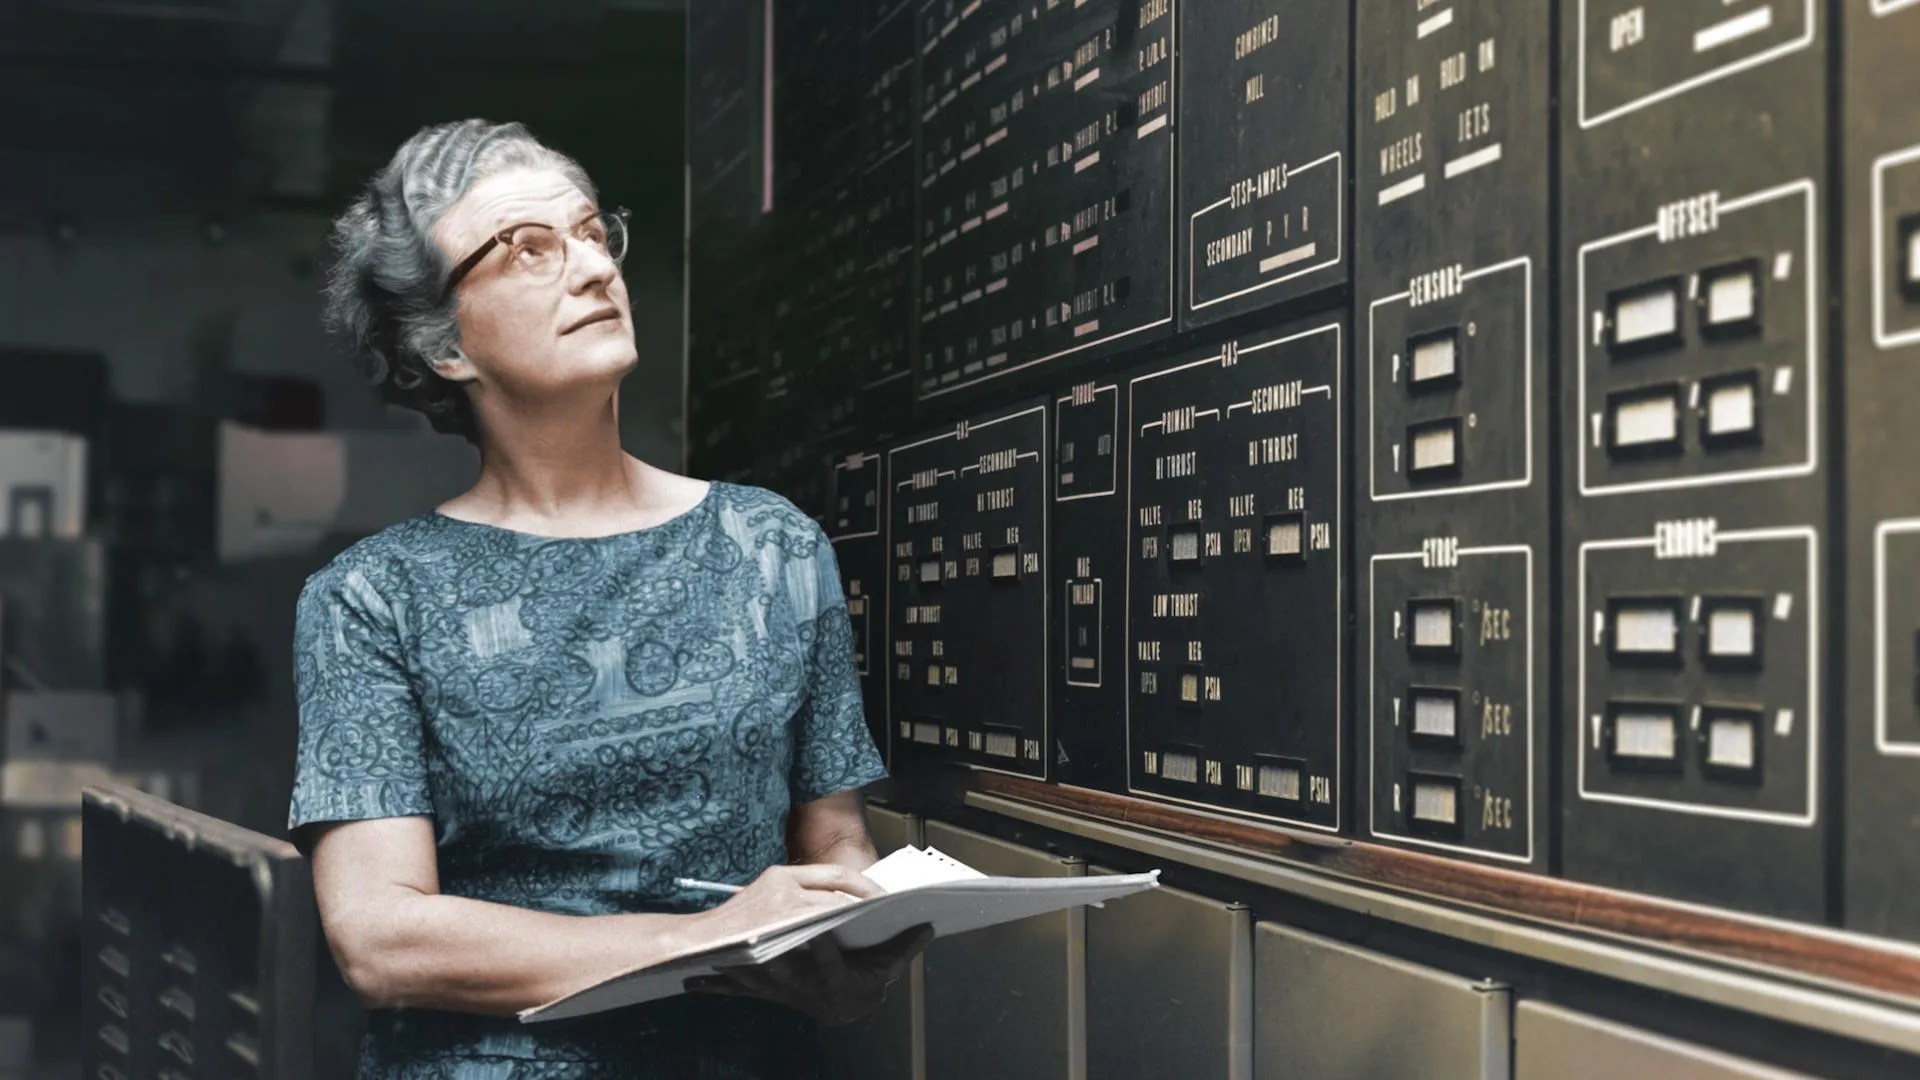 Nancy Grace Roman stands in front of a board that contains electronic spacecraft information.